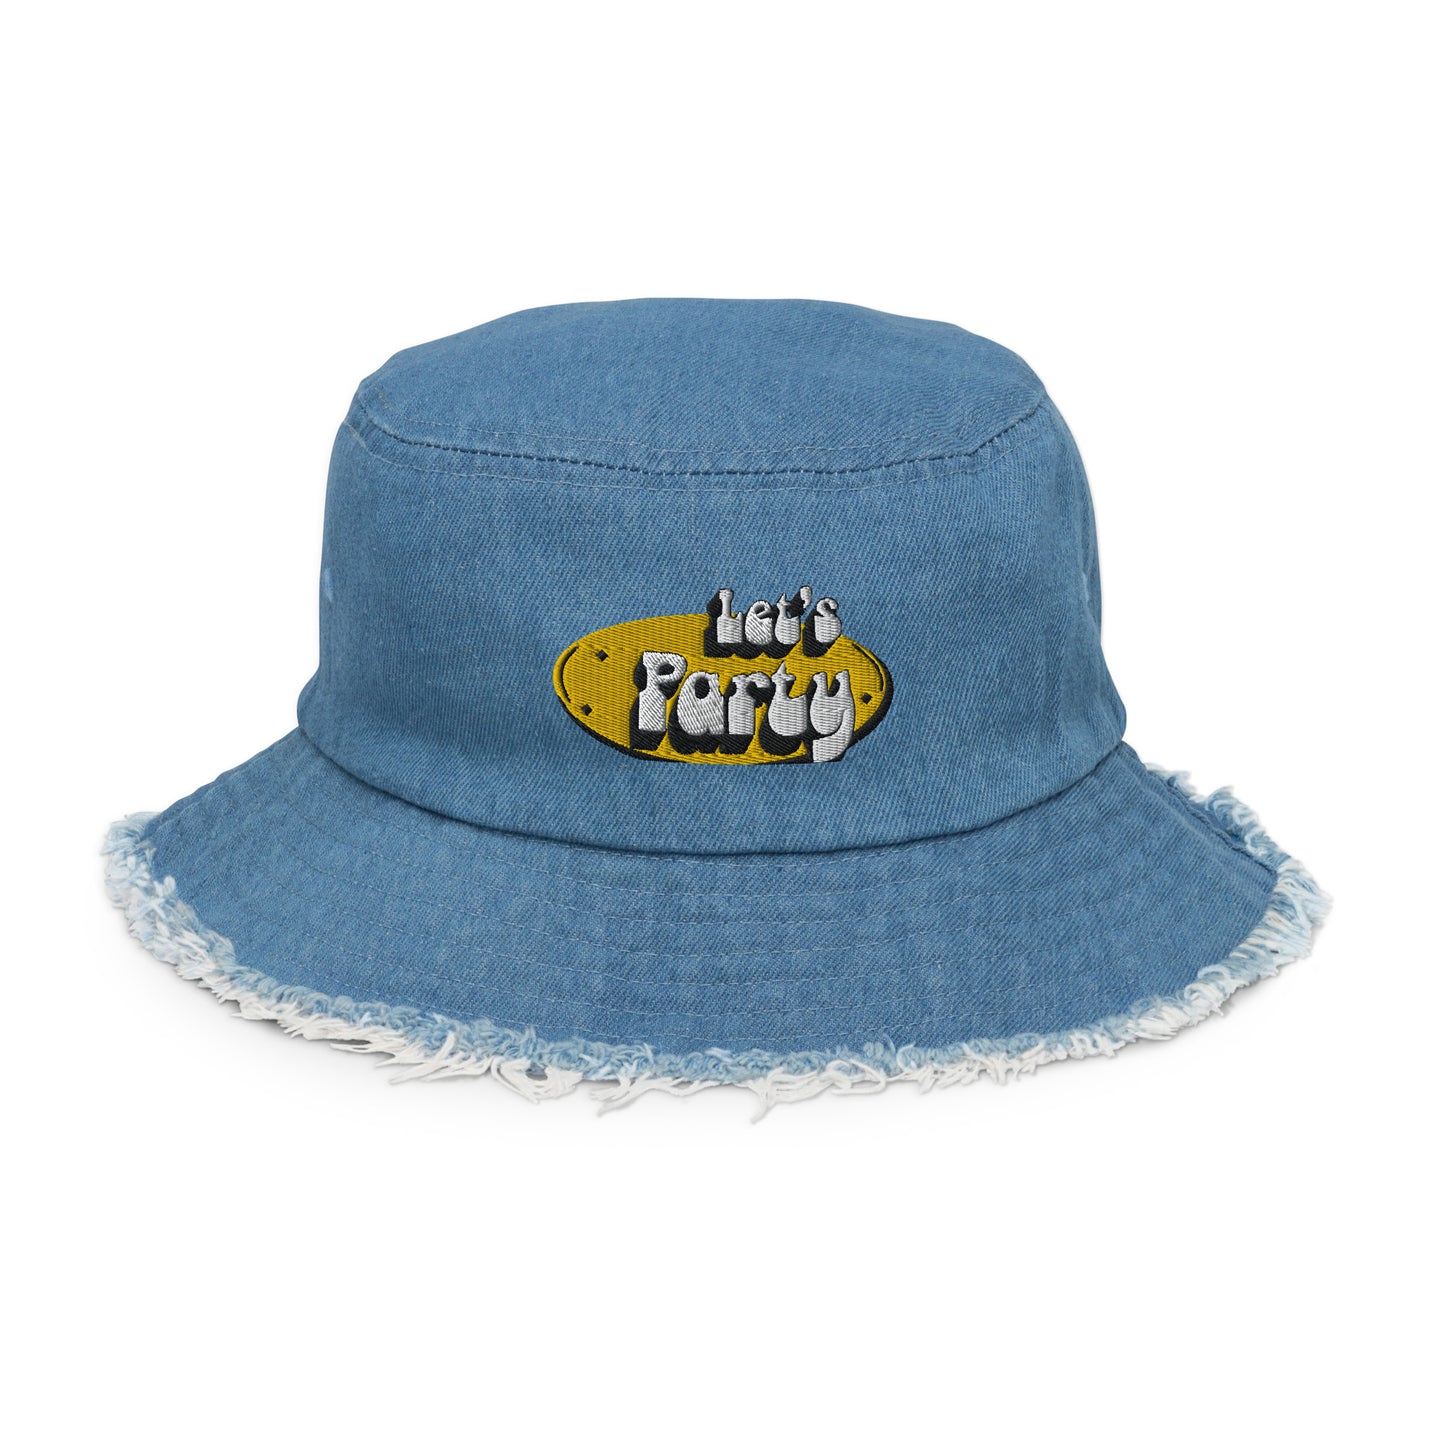 Let's Party Embroidered Bucket Hat